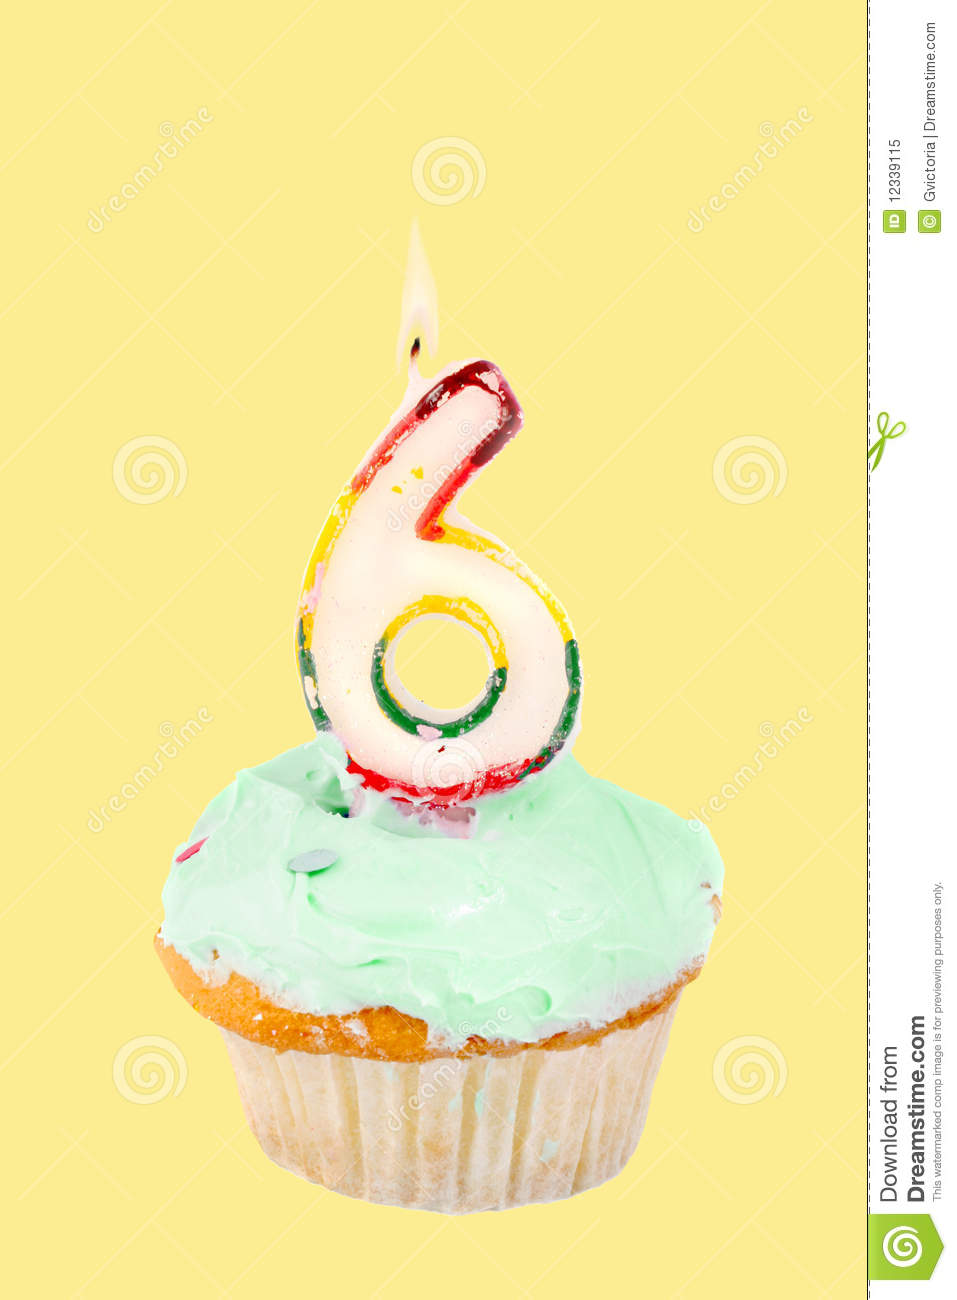 Sixth Birthday Cupcake With Green Frosting On A Yellow Background 